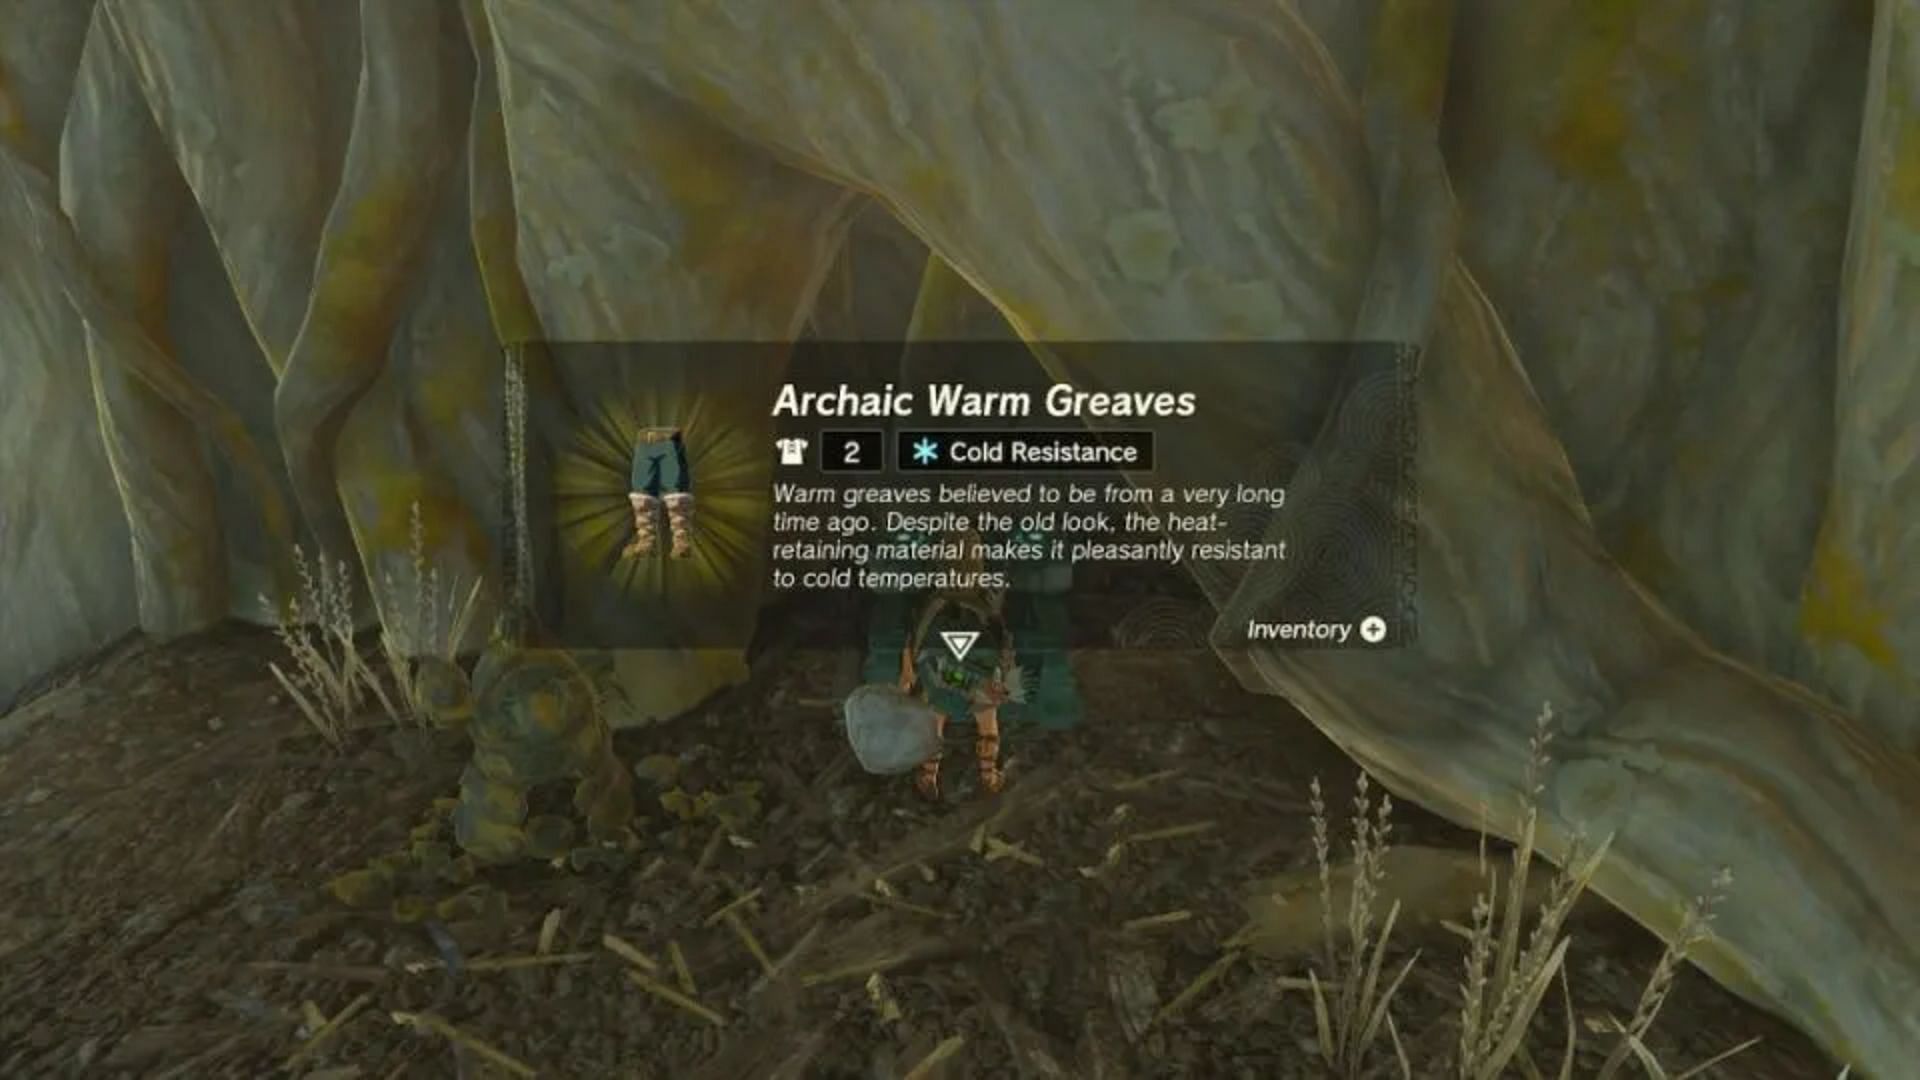 In-game description of the Archaic Warm Greaves (Image via Nintendo)